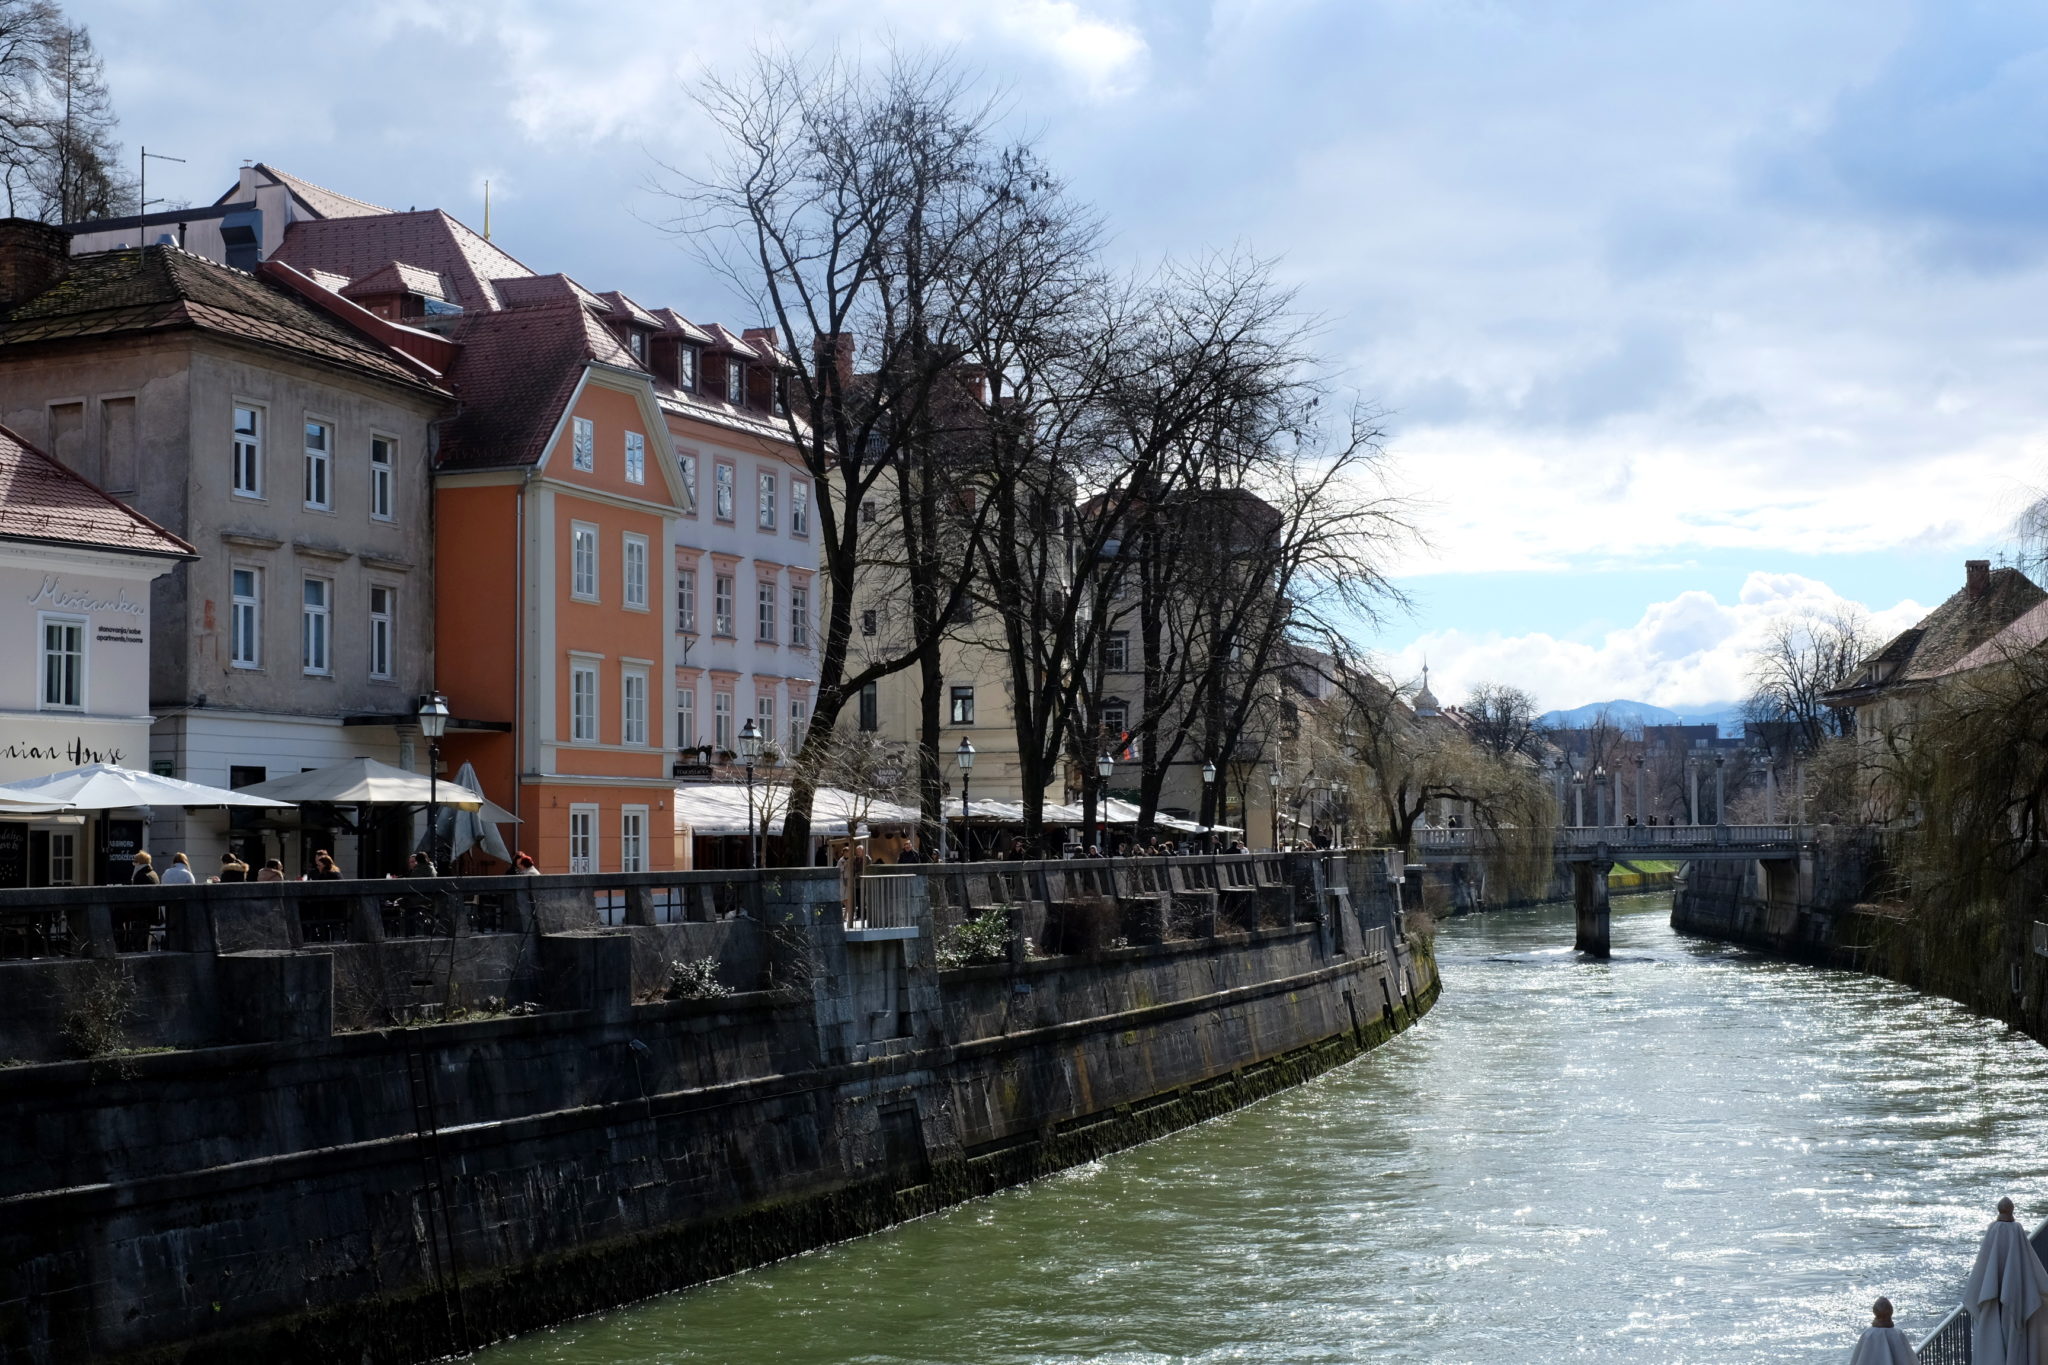 What’s up next? A quiet afternoon stroll to the vibrant Ljubljanica embankment called Špica and from there to the wooded slopes of Golovec. Photo by: Exploring Slovenia.